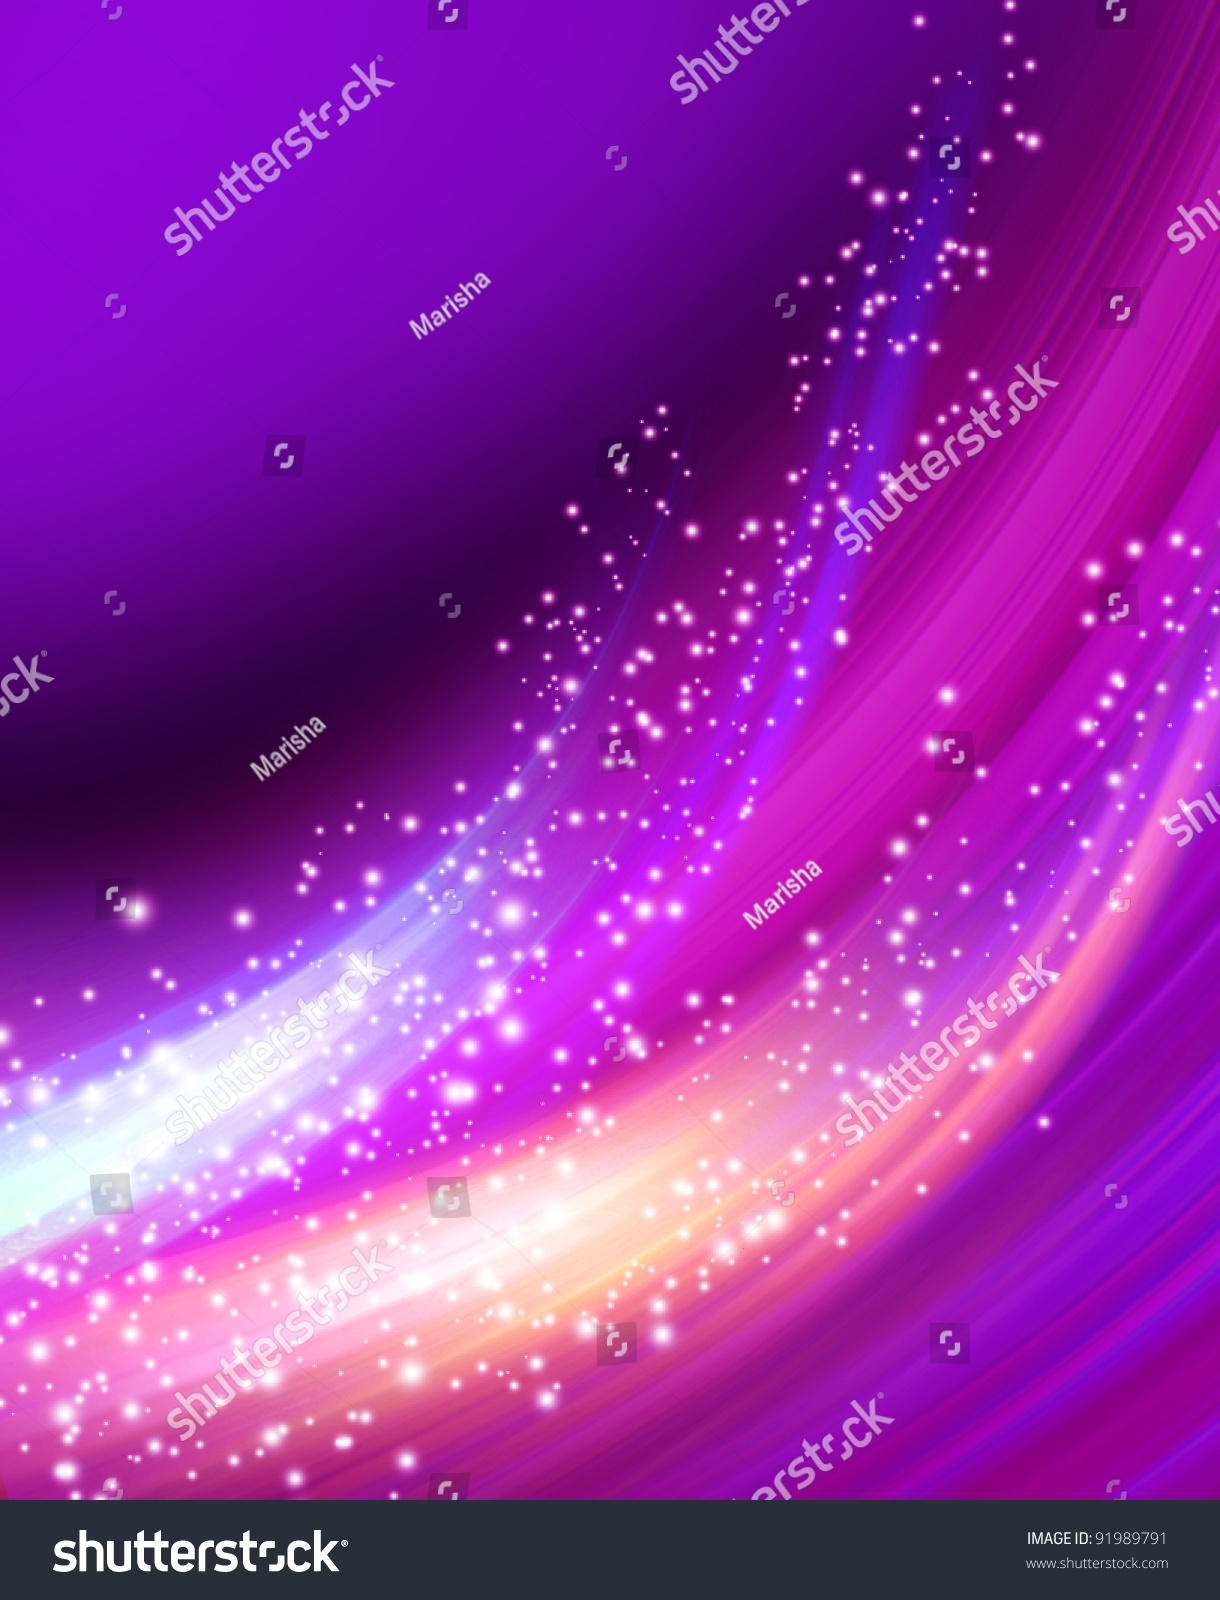 Abstract Glowing Background With Stars Stock Photo 91989791 : Shutterstock